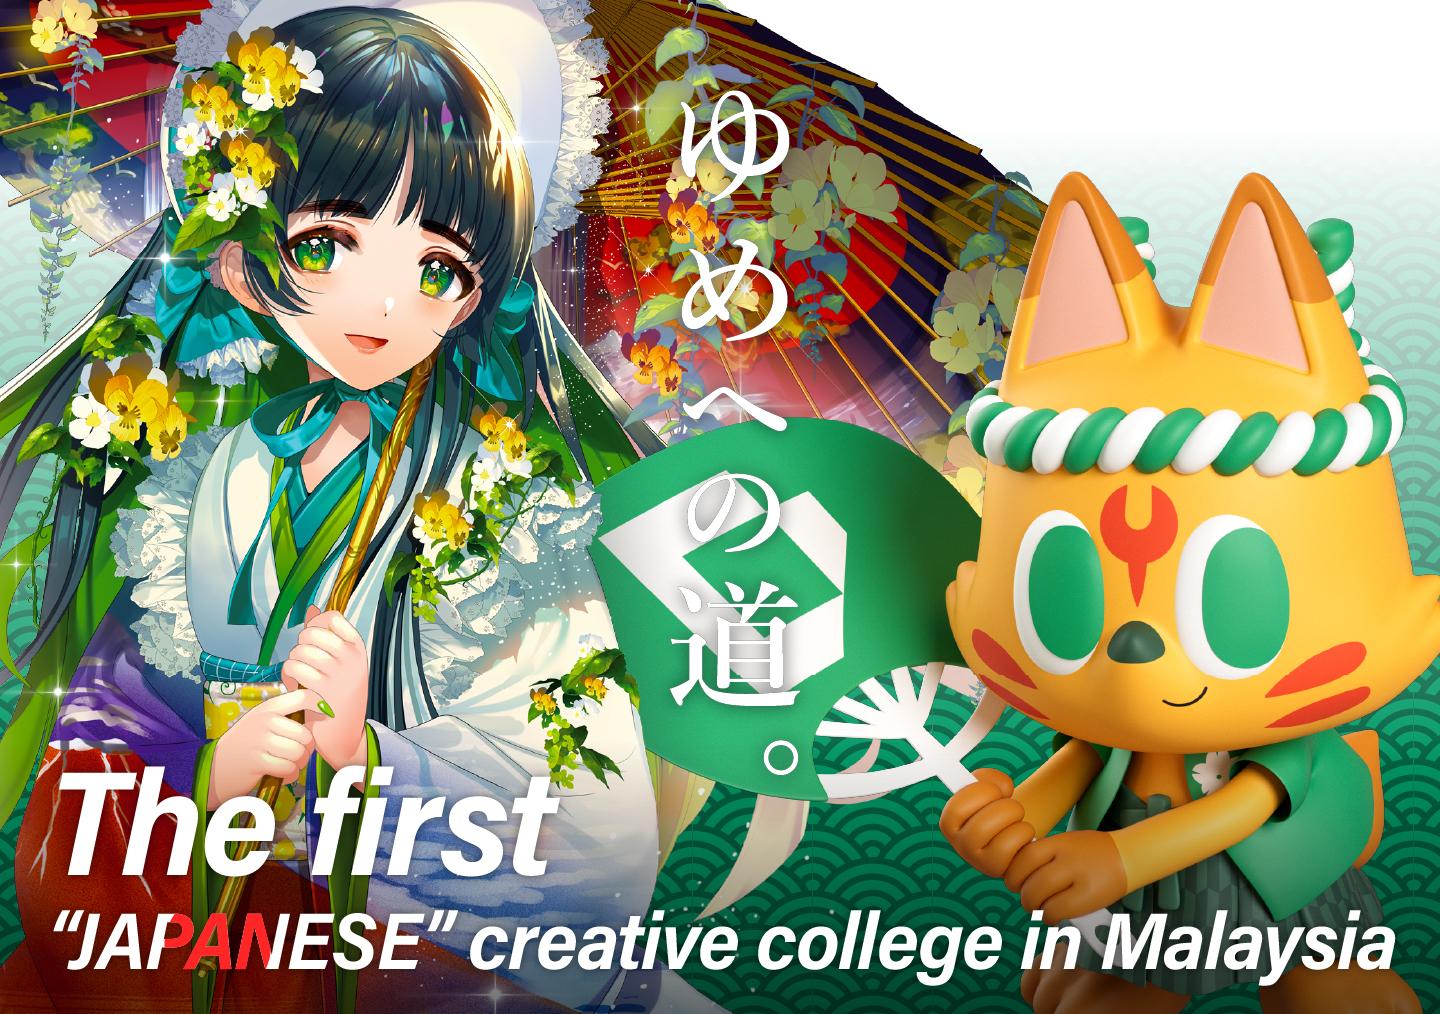 Join NDS, the first and only Japanese art college in Malaysia. Exceptional art and design courses to launch your creative career.